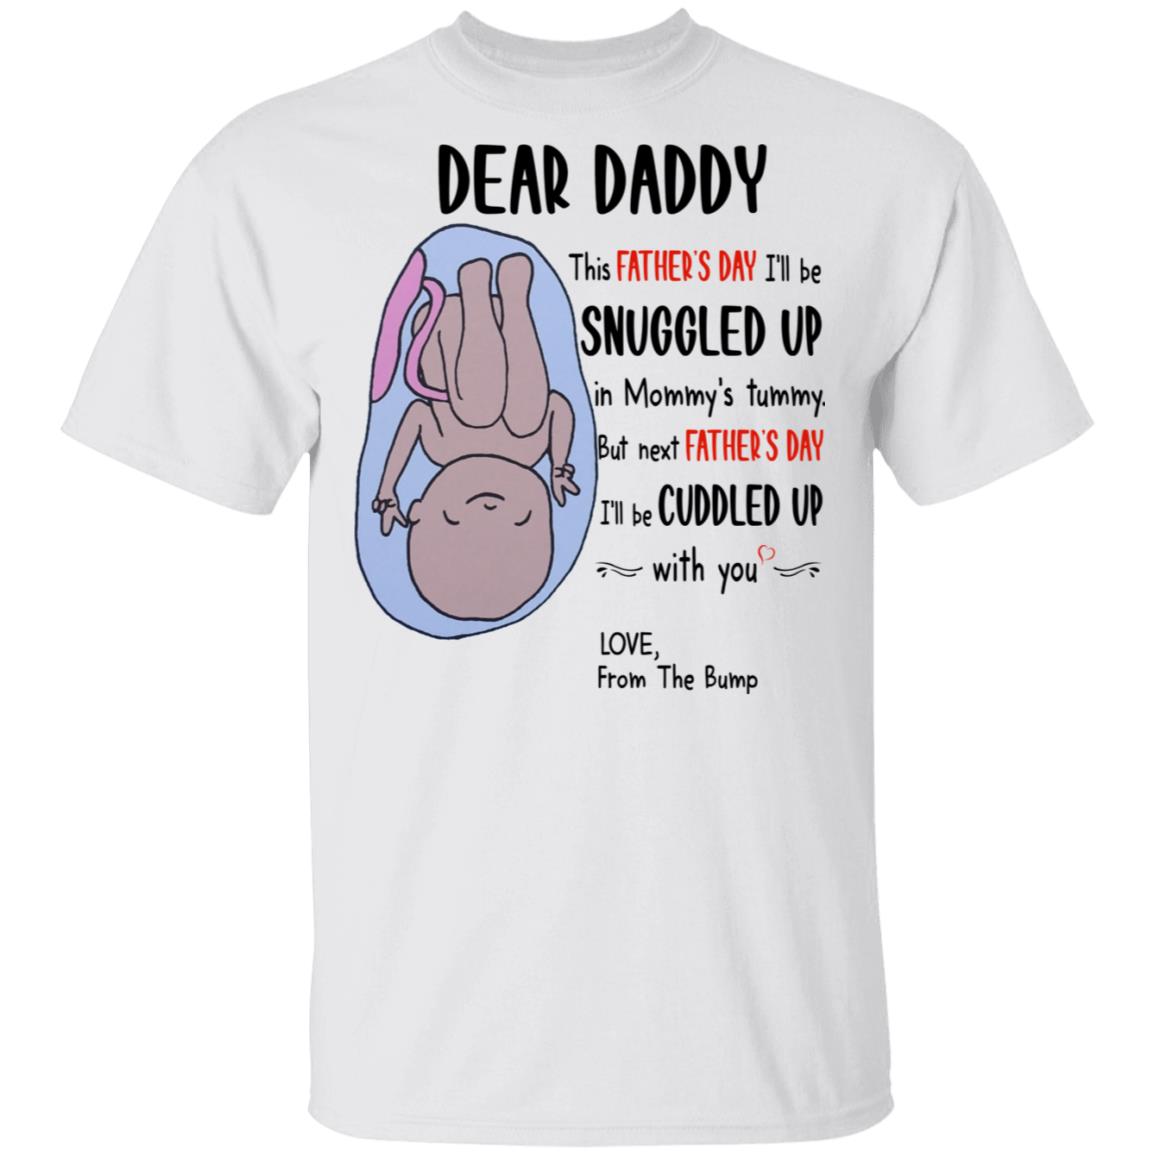 Dear Daddy This Father's Day I'll Be Snuggled Up Funny Father's Day Shirt, hoodie